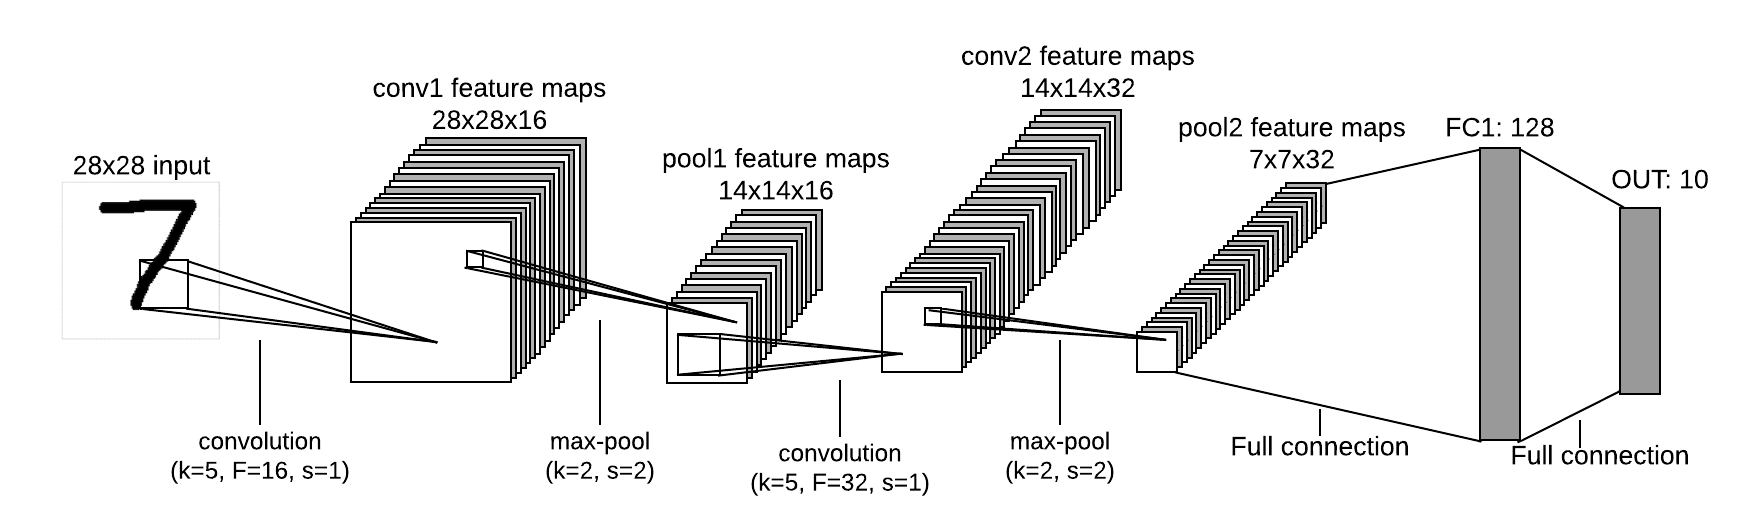 CNN - Convolutional and Pooling Layers for Images